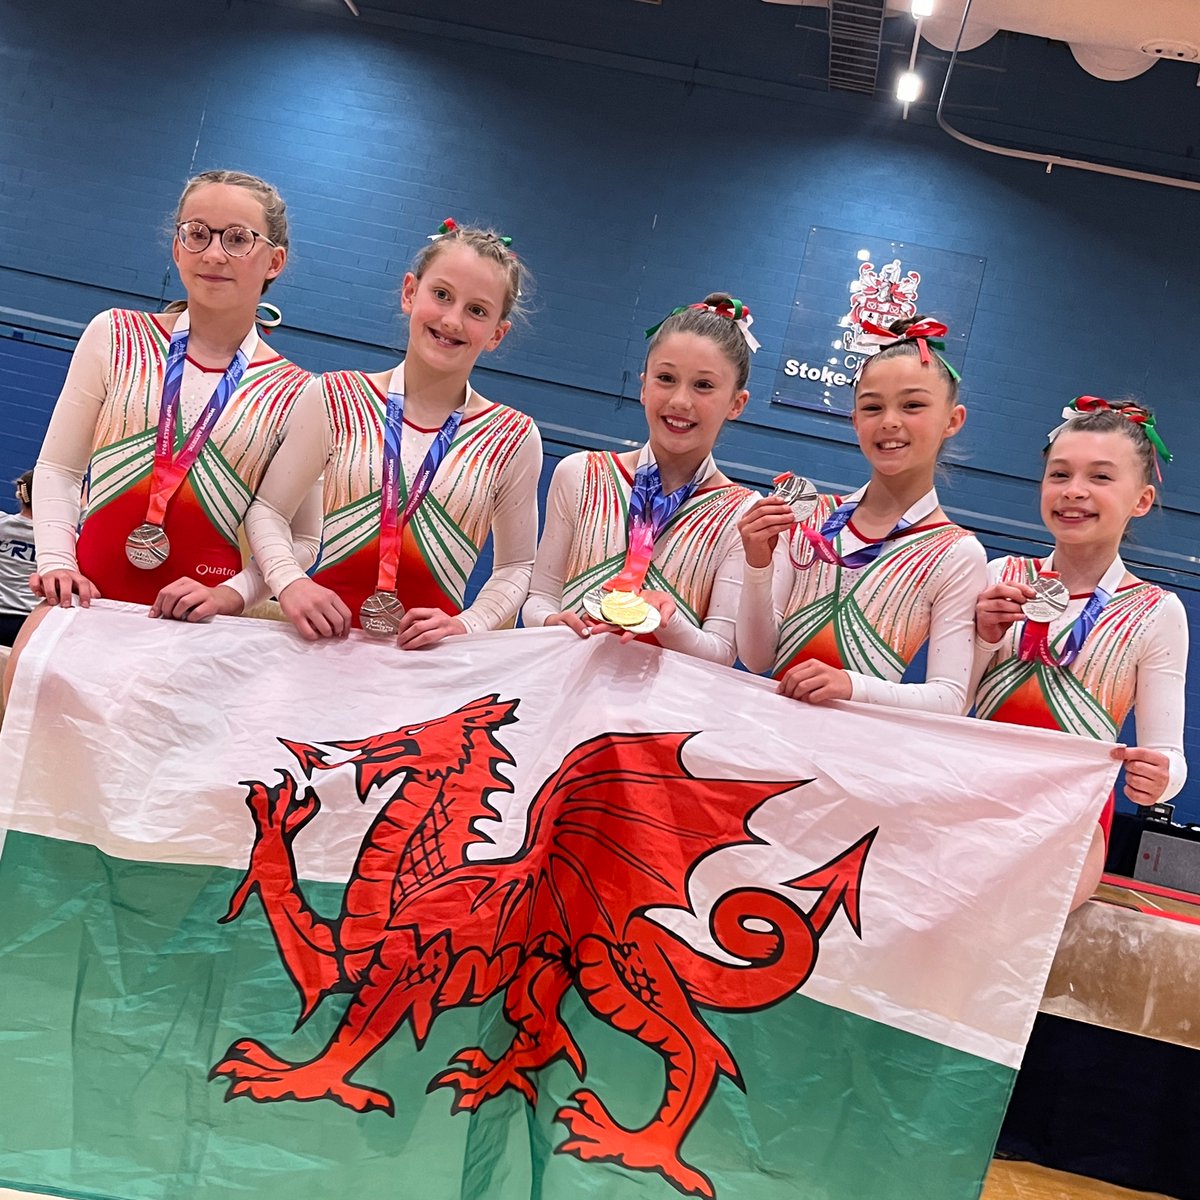 We couldn't be more proud of Madison and her Welsh team mates - she has worked so consistently hard and was delighted to make National Finals. To come home with Team Silver & contribute to Team Wales winning the Rosebowl AGAIN was definitely icing on the cake! #TeamVGA #TeamWales